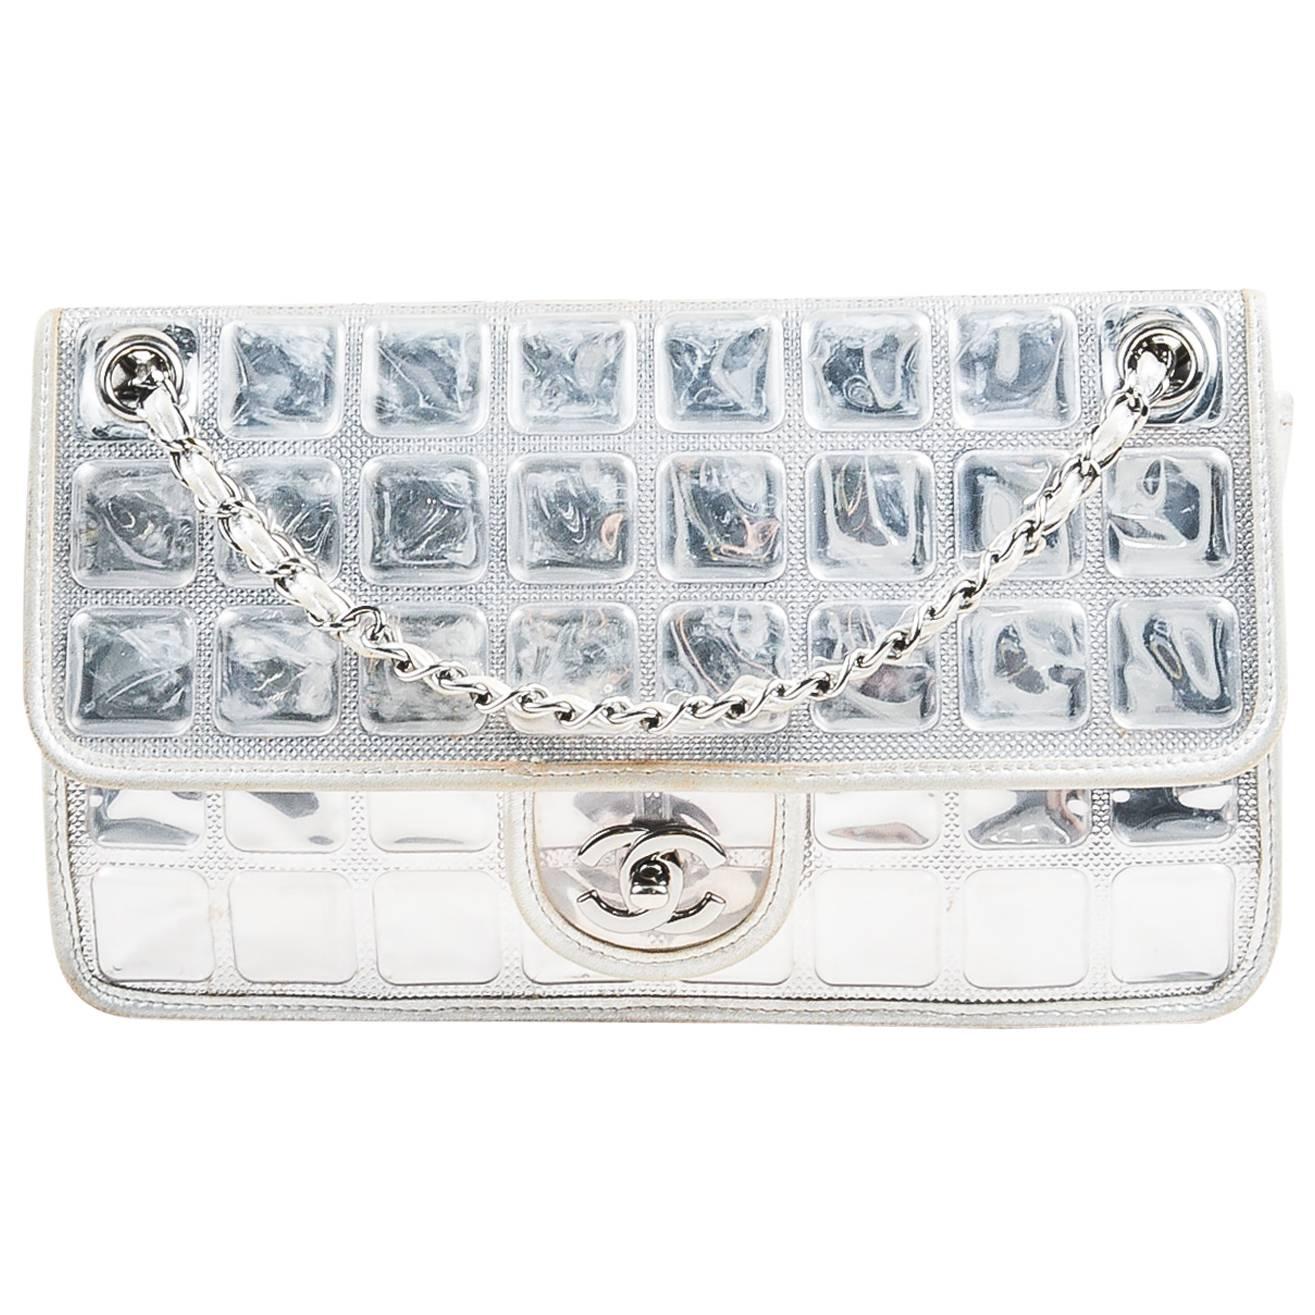 Chanel Silver Metallic Leather Coated "Ice Cube" Classic Flap Shoulder Bag For Sale